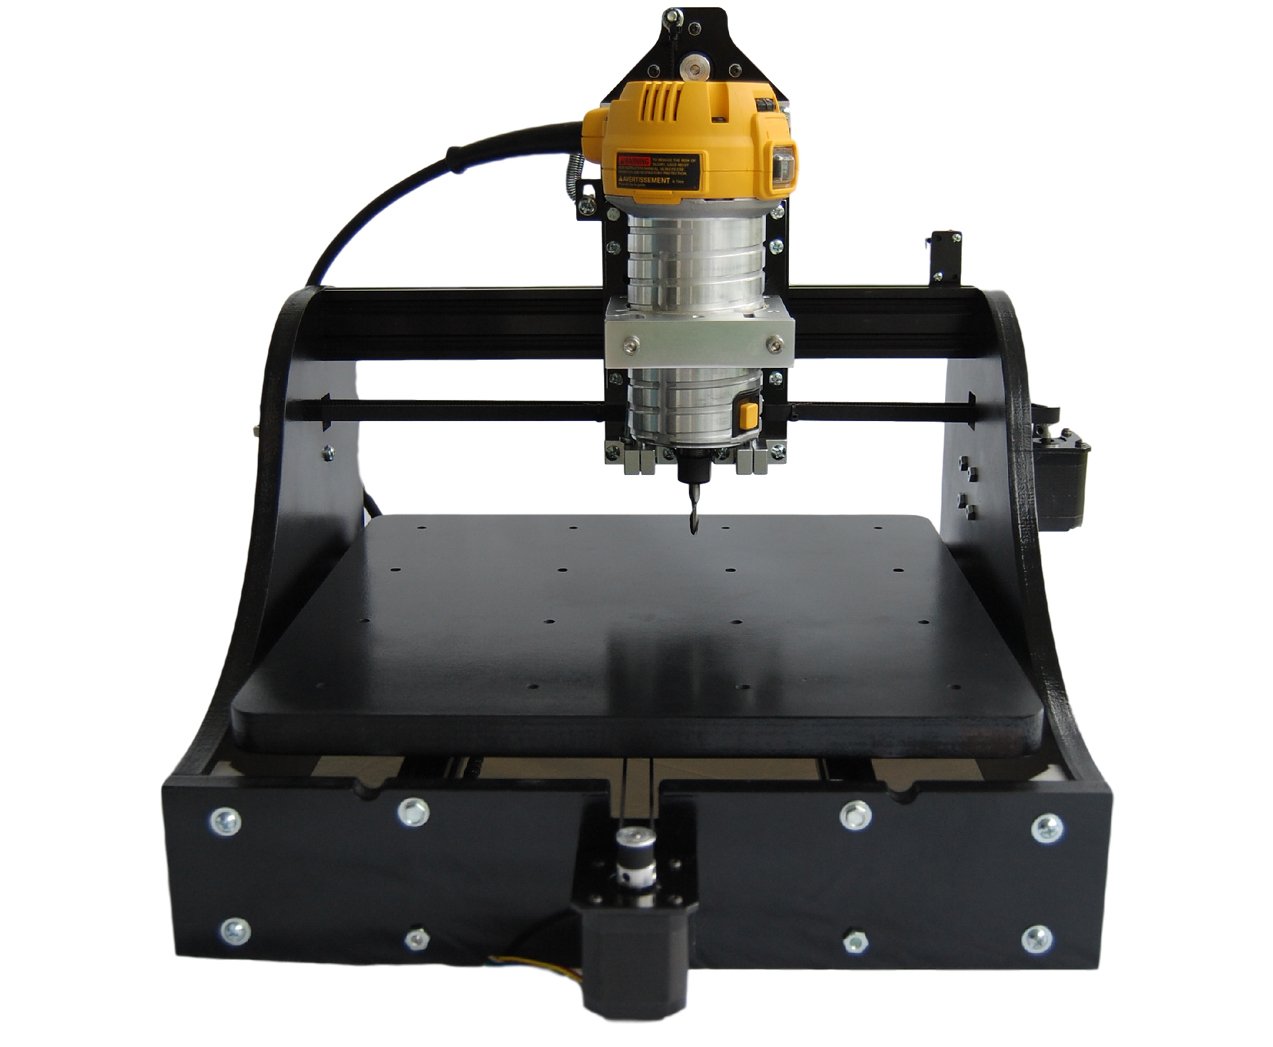 This Desktop CNC Machine Gets You Milling for Under $500